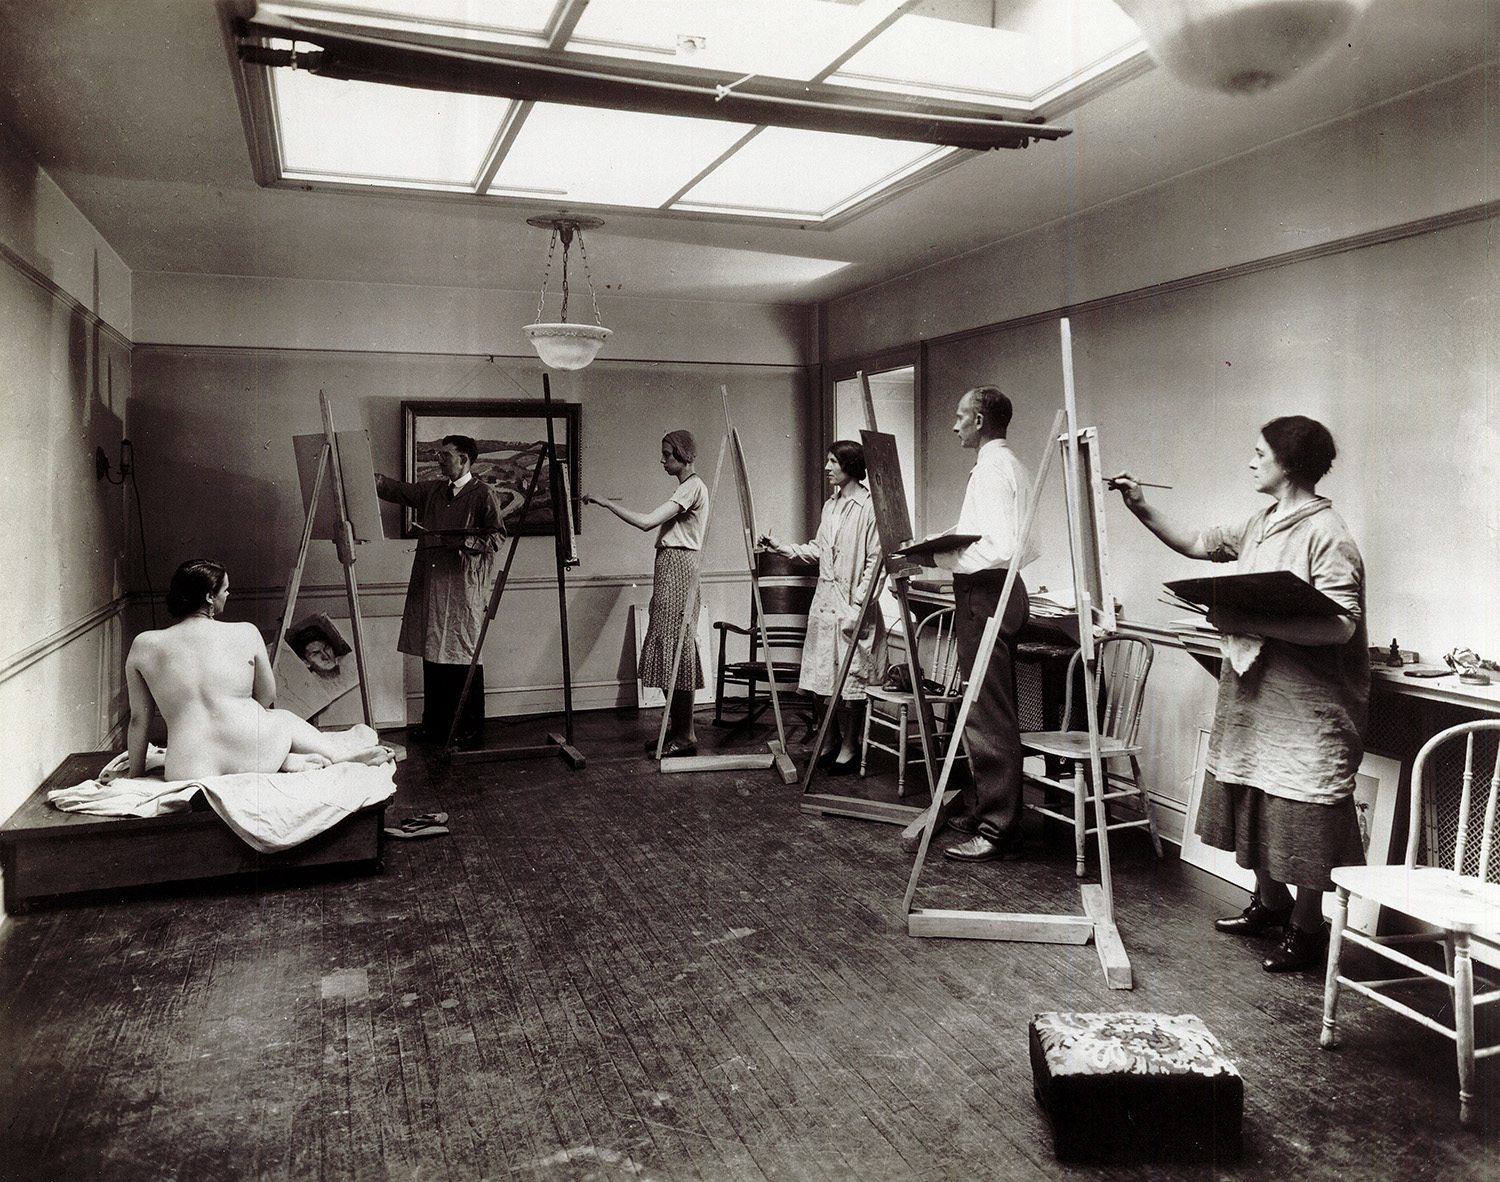 Phillips Gallery art school, C. Law Watkins, second from right, ca. 1931–33. Photograph courtesy the Phillips Collection.